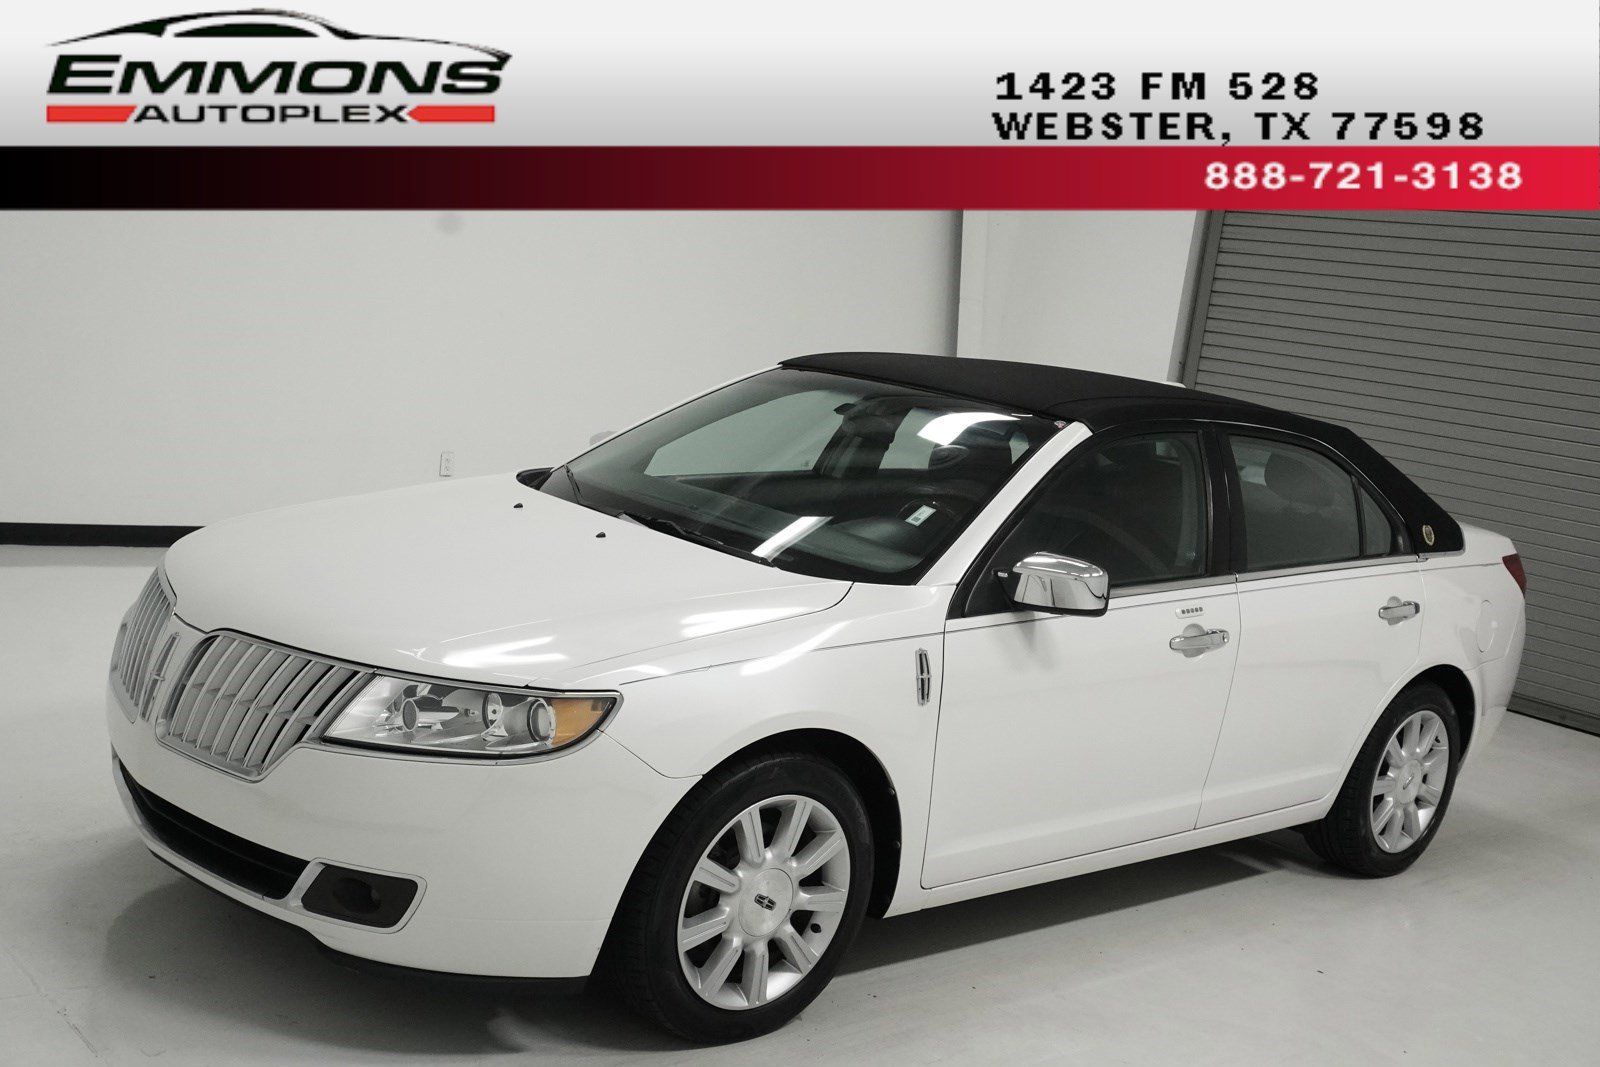 Used 2012 LINCOLN MKZ